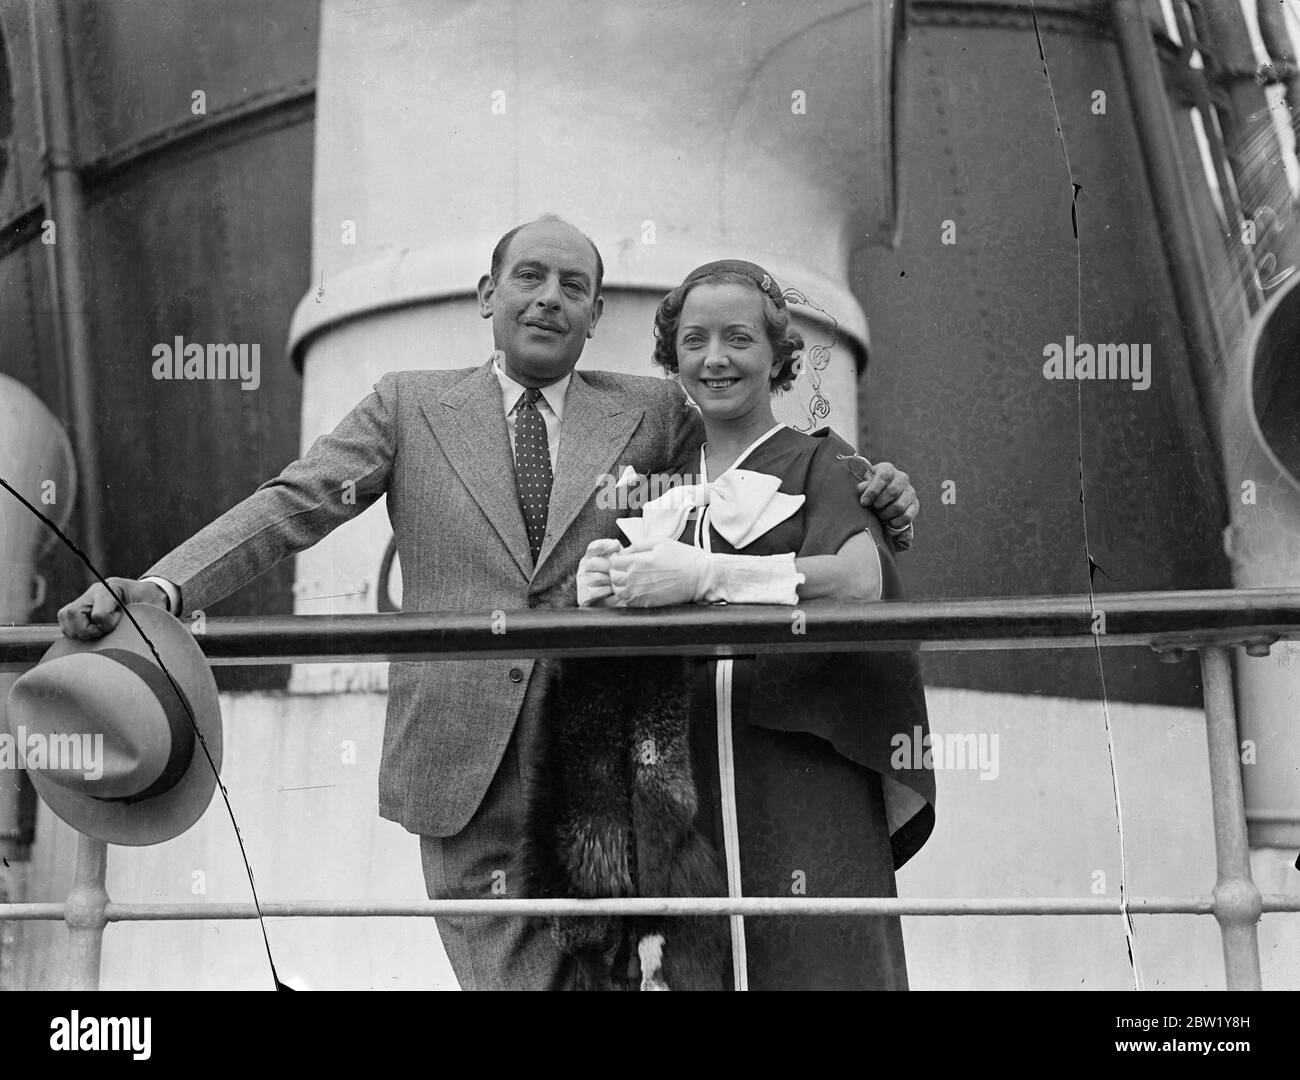 Sir Cedric Hardwicke returns from America met by wife. Sir Cedric Hardwicke, the British actor, arrived at Southampton aboard the Aquitania from New York. He was met by his wife, Lady Hardwick, on arrival. Photo shows, Sir Cedric Hardwicke with his wife on arrival at Southampton. A chilly 1937 Stock Photo